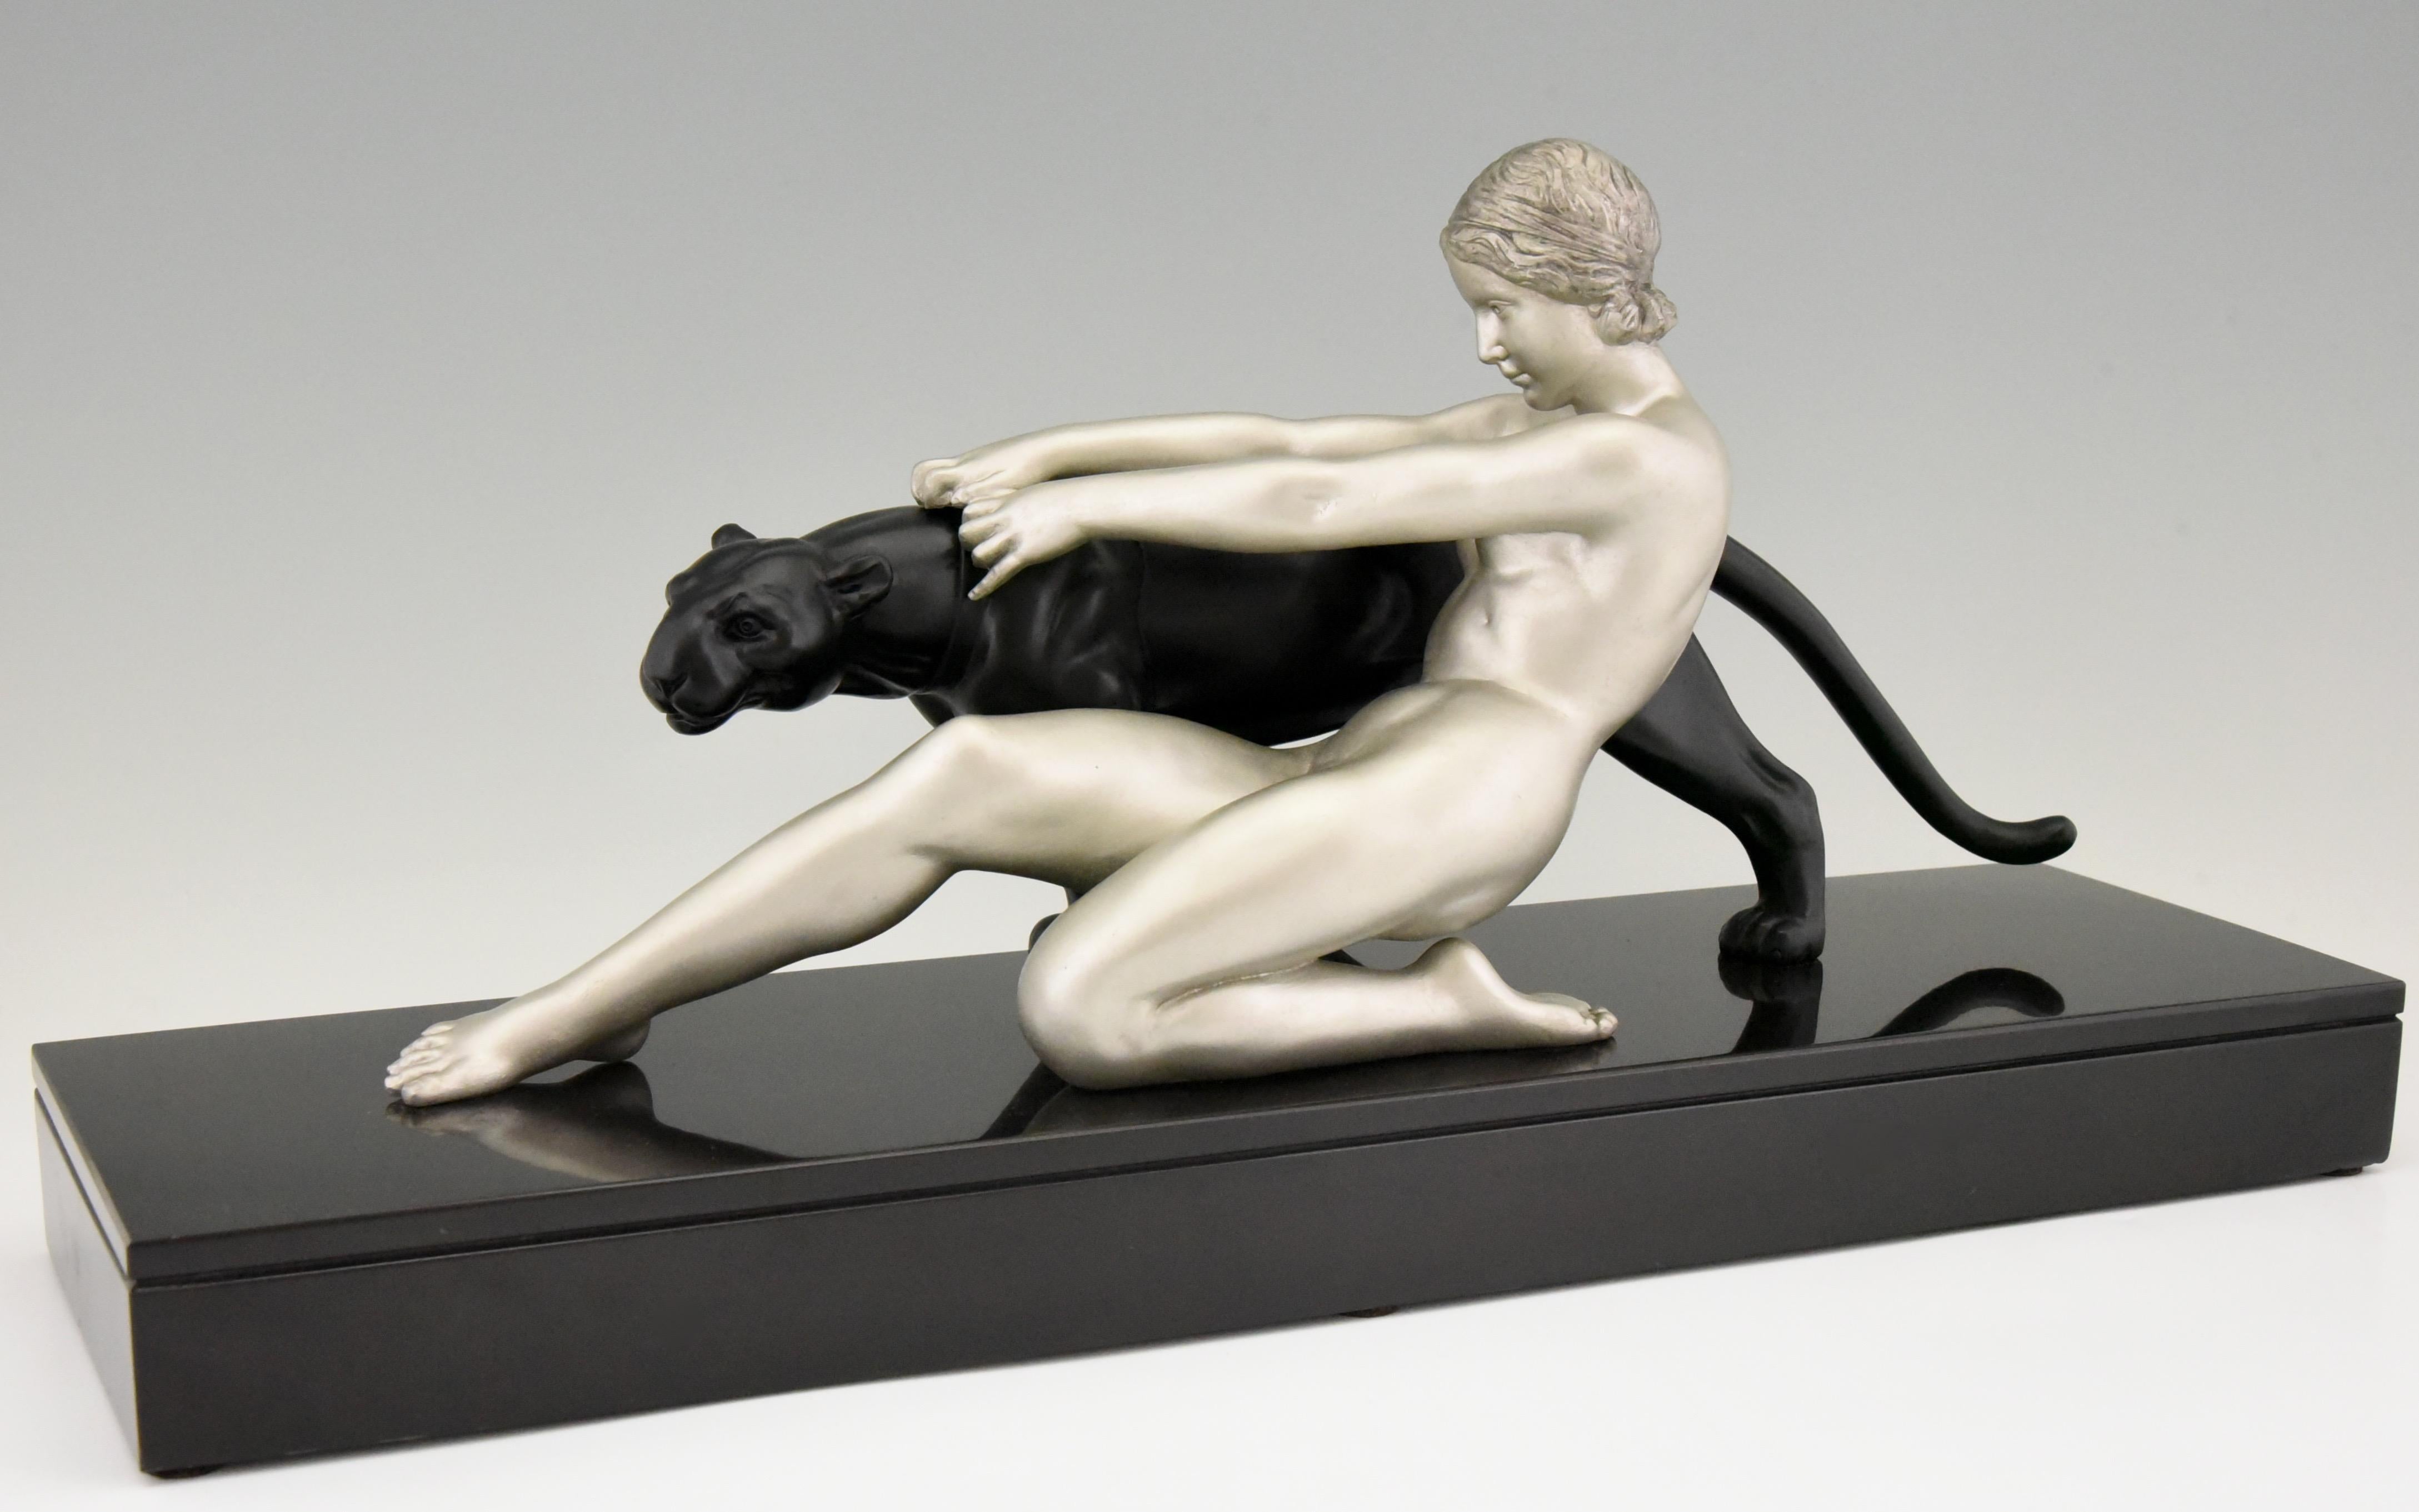 Art Deco sculpture of a nude with a panter on a Belgian Black marble base by the French artist Alexandre Ouline, who worked in France, 1918-1940. The Art metal sculpture has a silver and black patina.
Literature:
“Animals in bronze” by Christopher